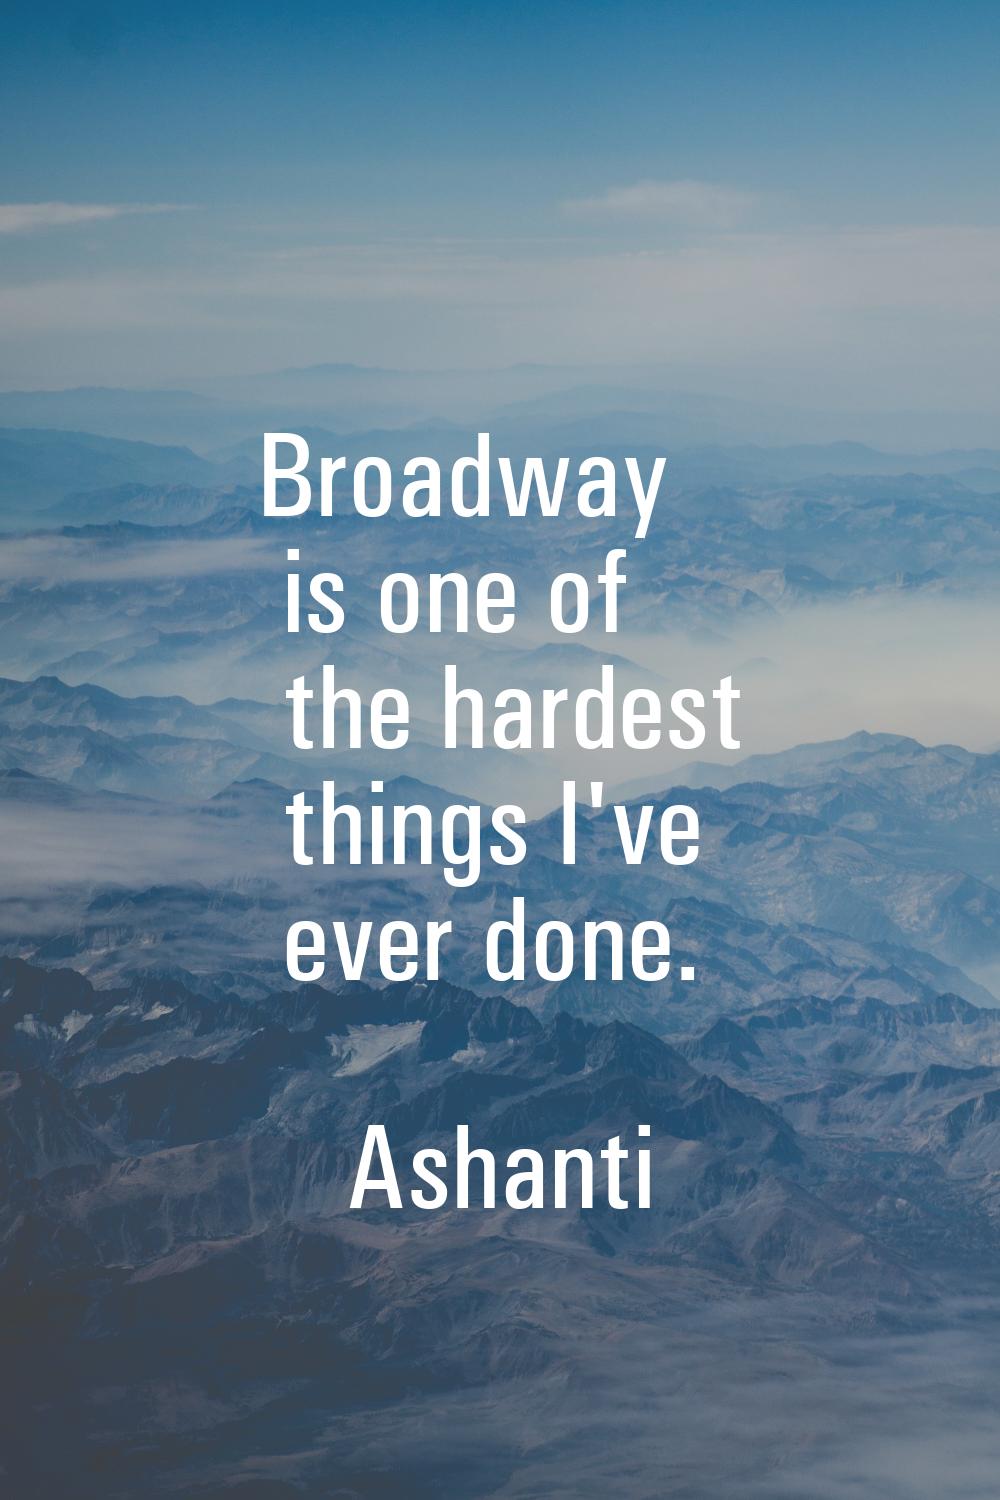 Broadway is one of the hardest things I've ever done.